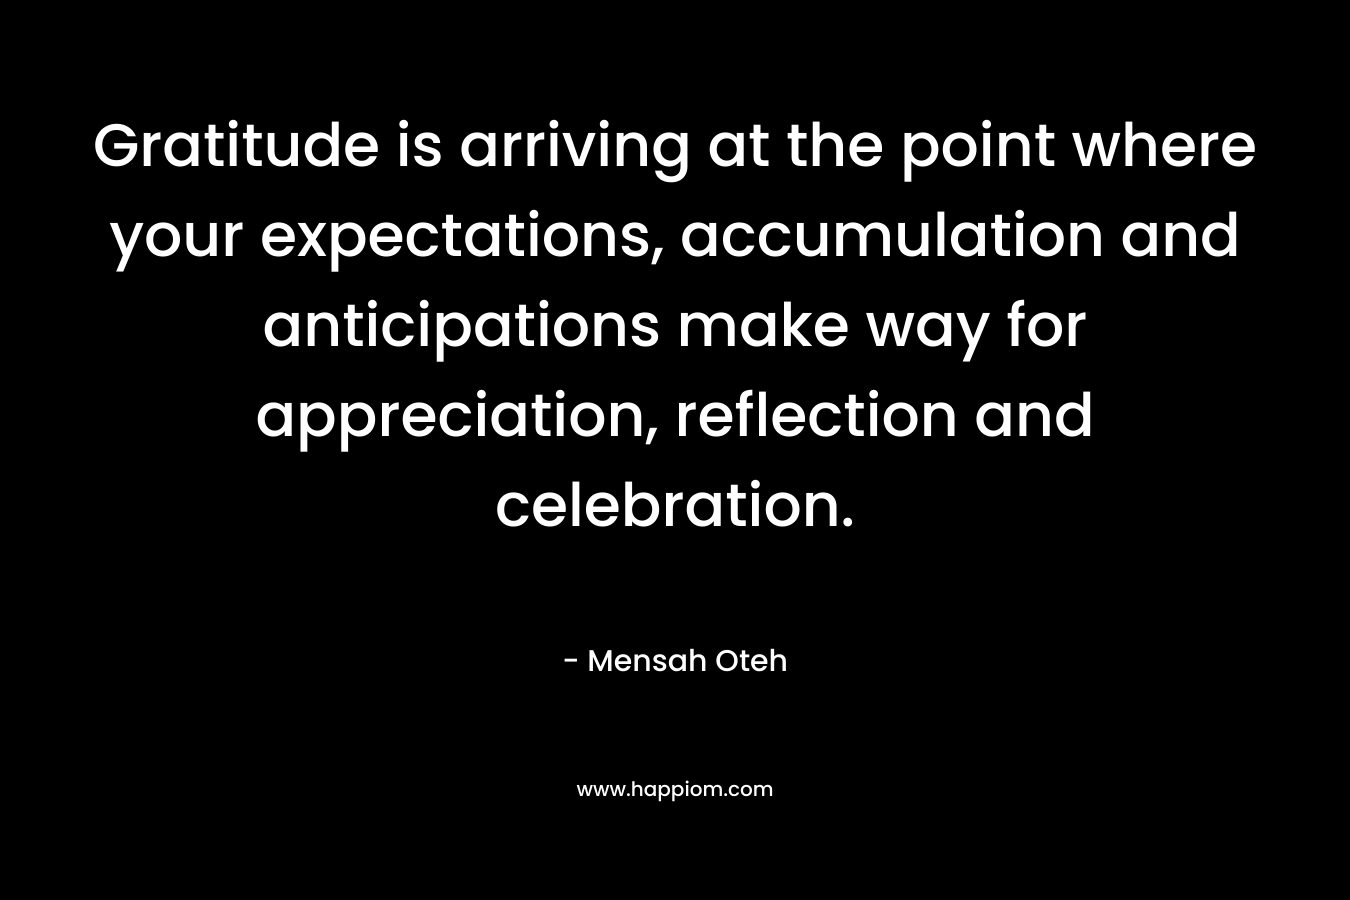 Gratitude is arriving at the point where your expectations, accumulation and anticipations make way for appreciation, reflection and celebration.